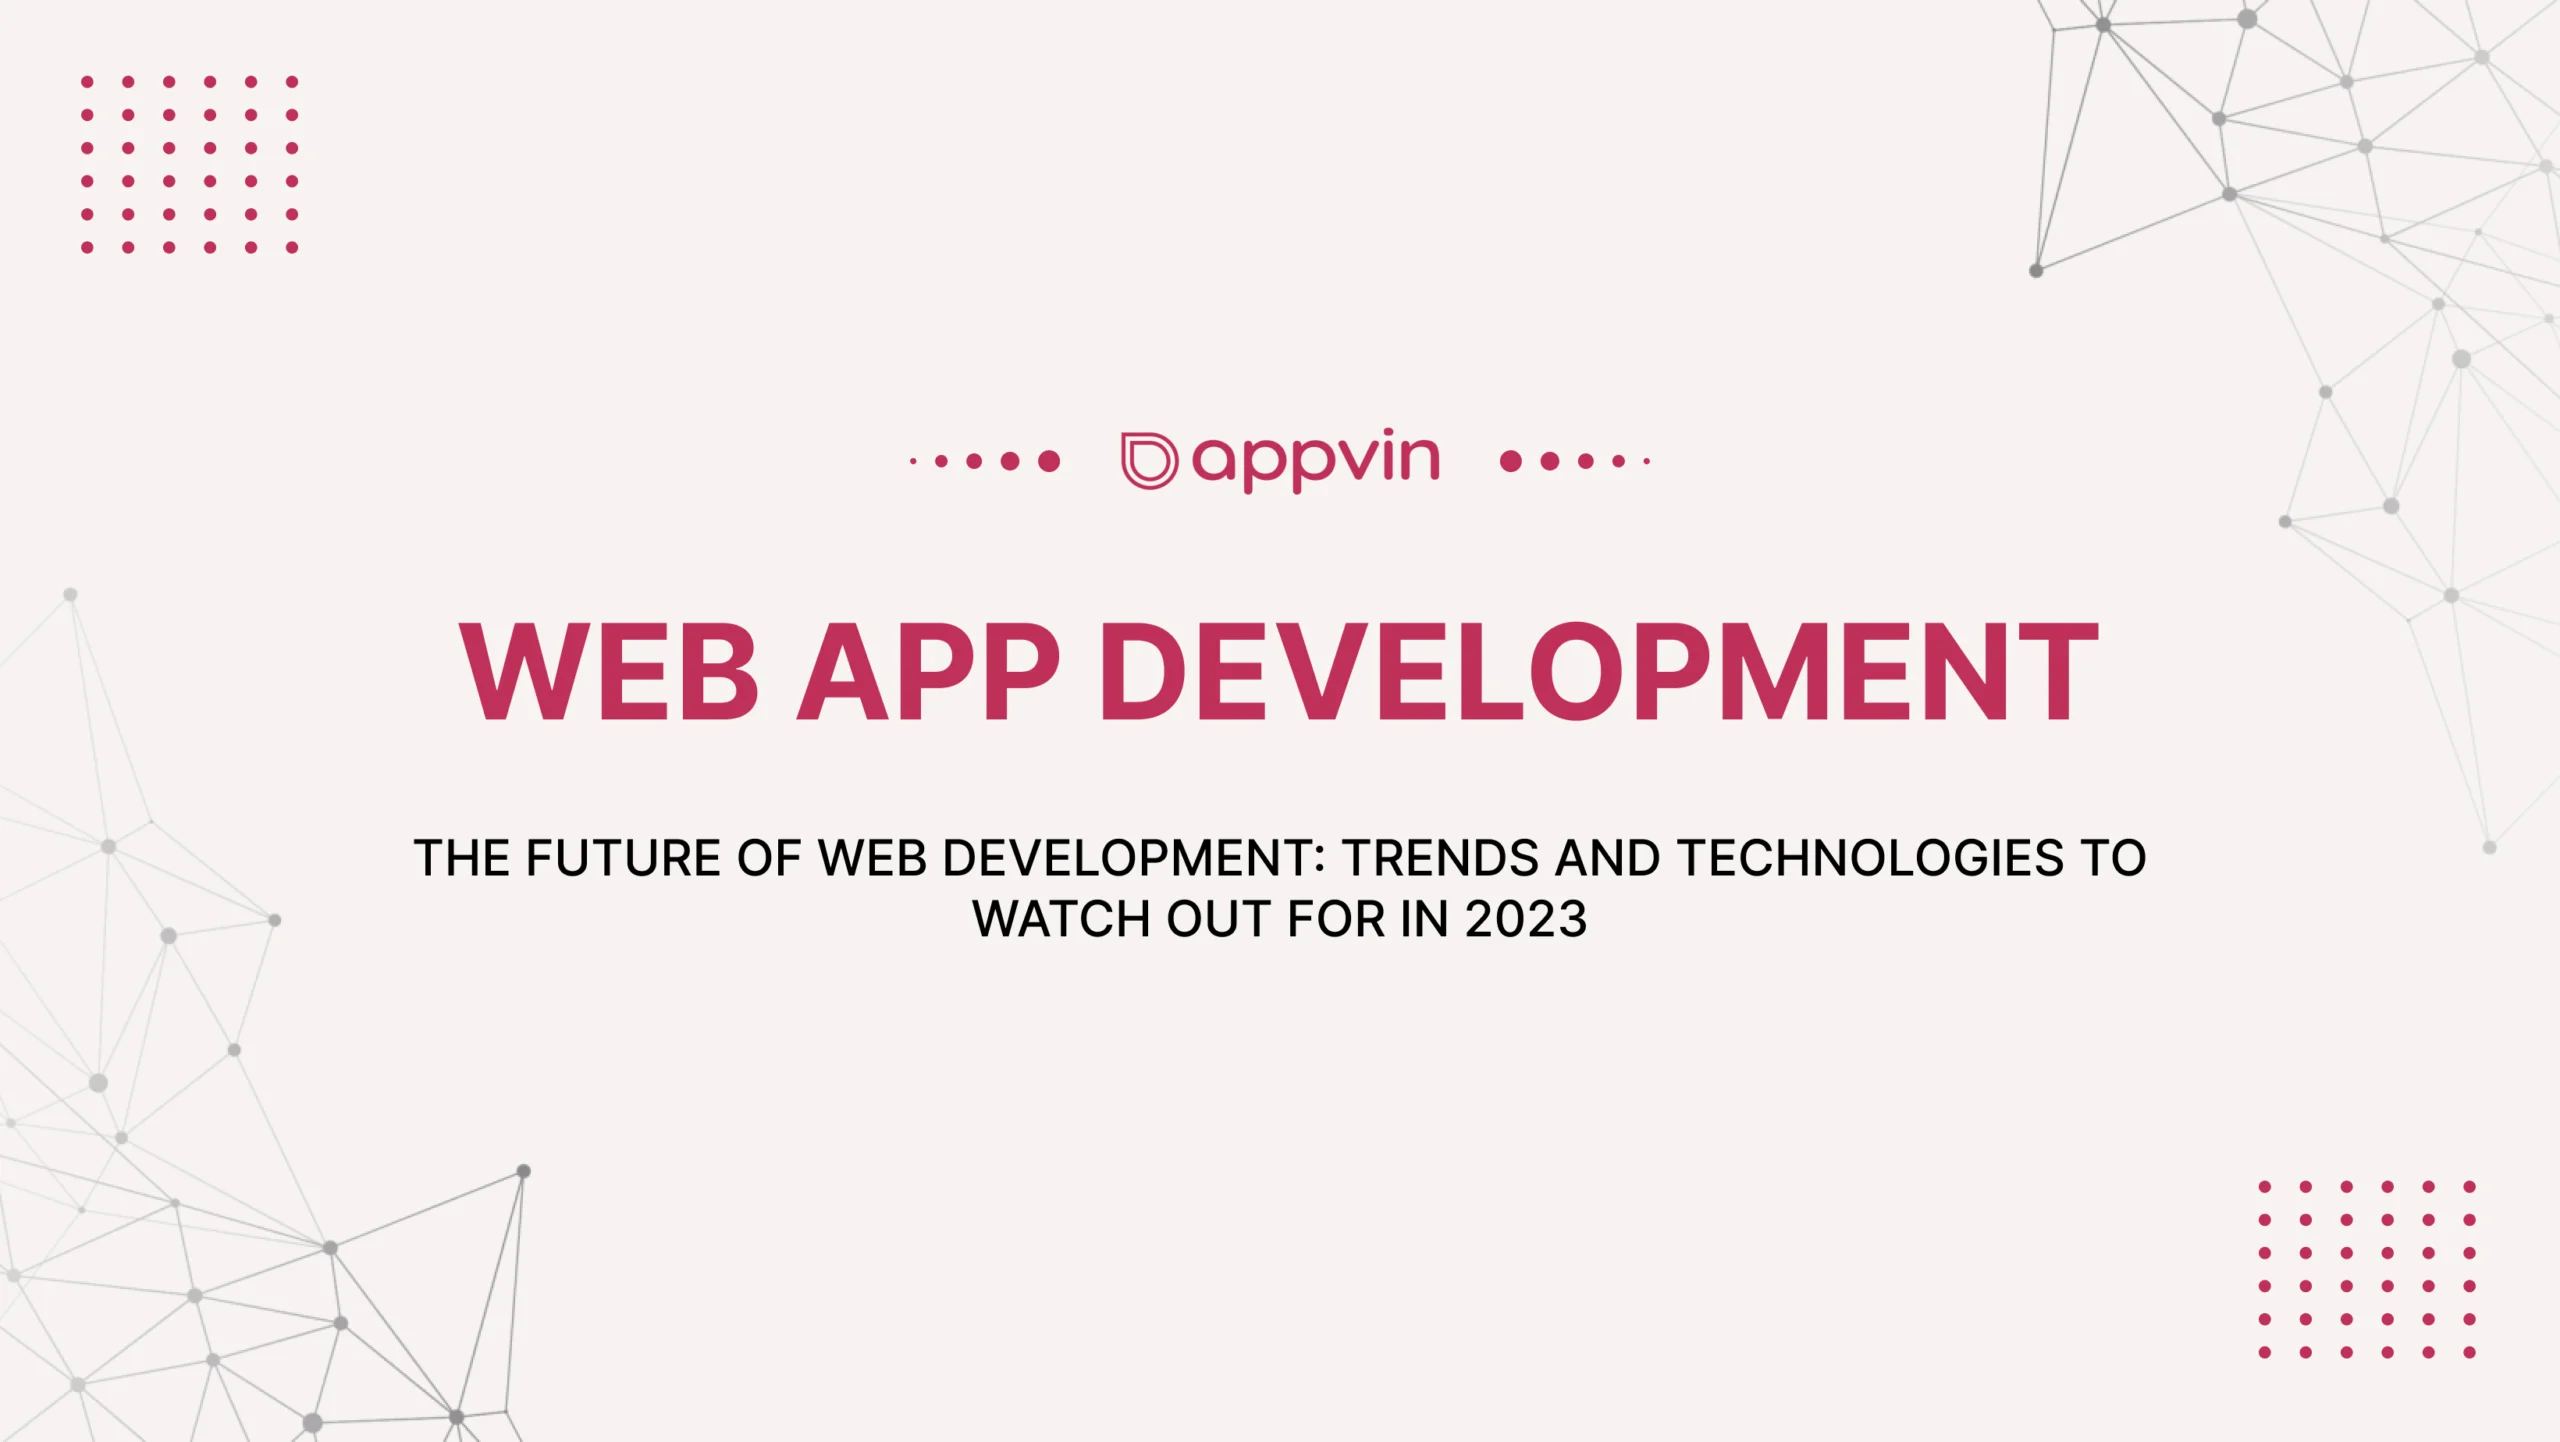 The Future of Web Development: Trends and Technologies to Watch Out For in 2023 